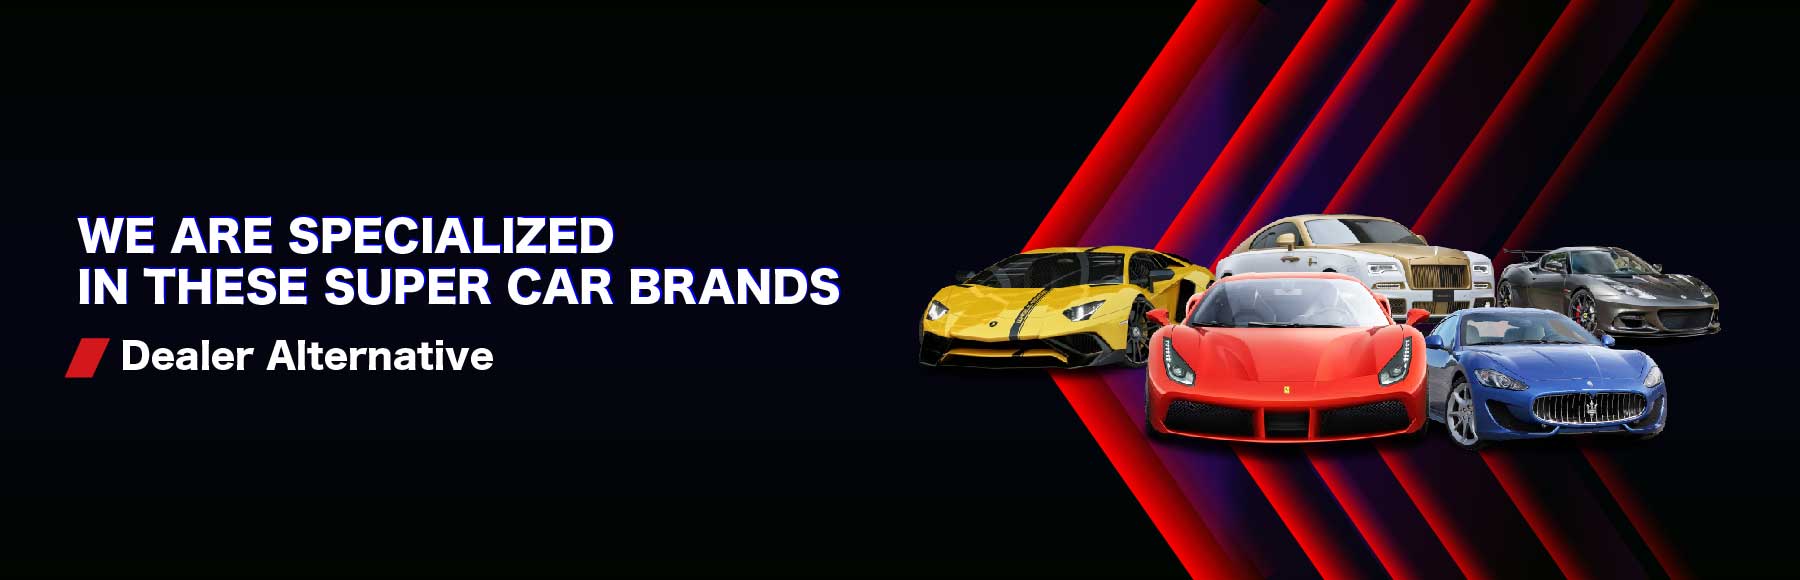 we are specialized in these super car brands